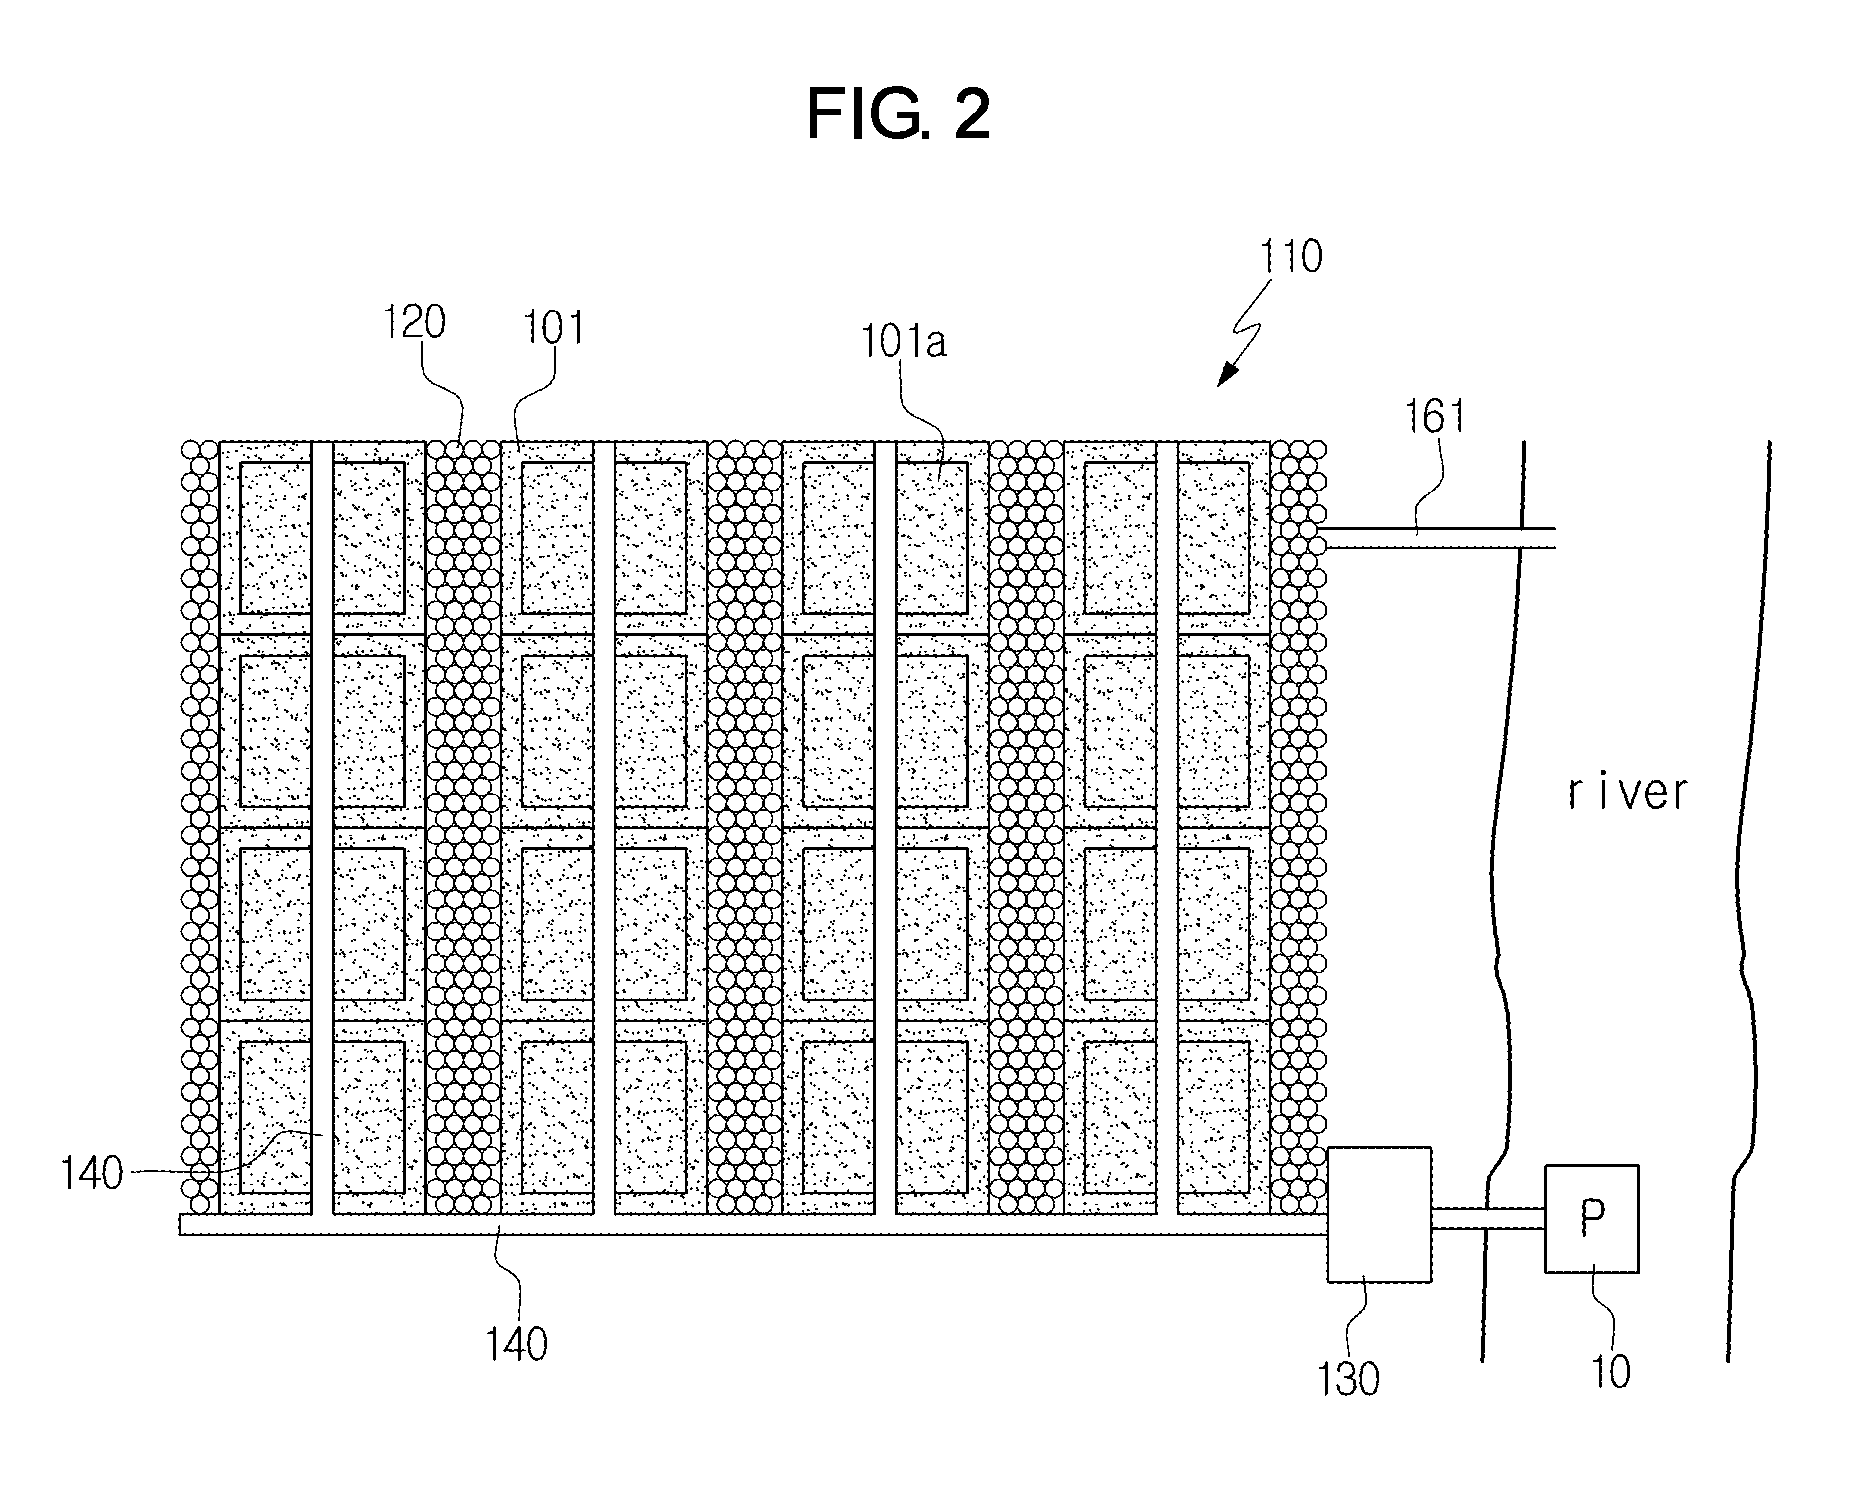 River water purification apparatus and method using treatment soil layer and permeable filtering medium layer